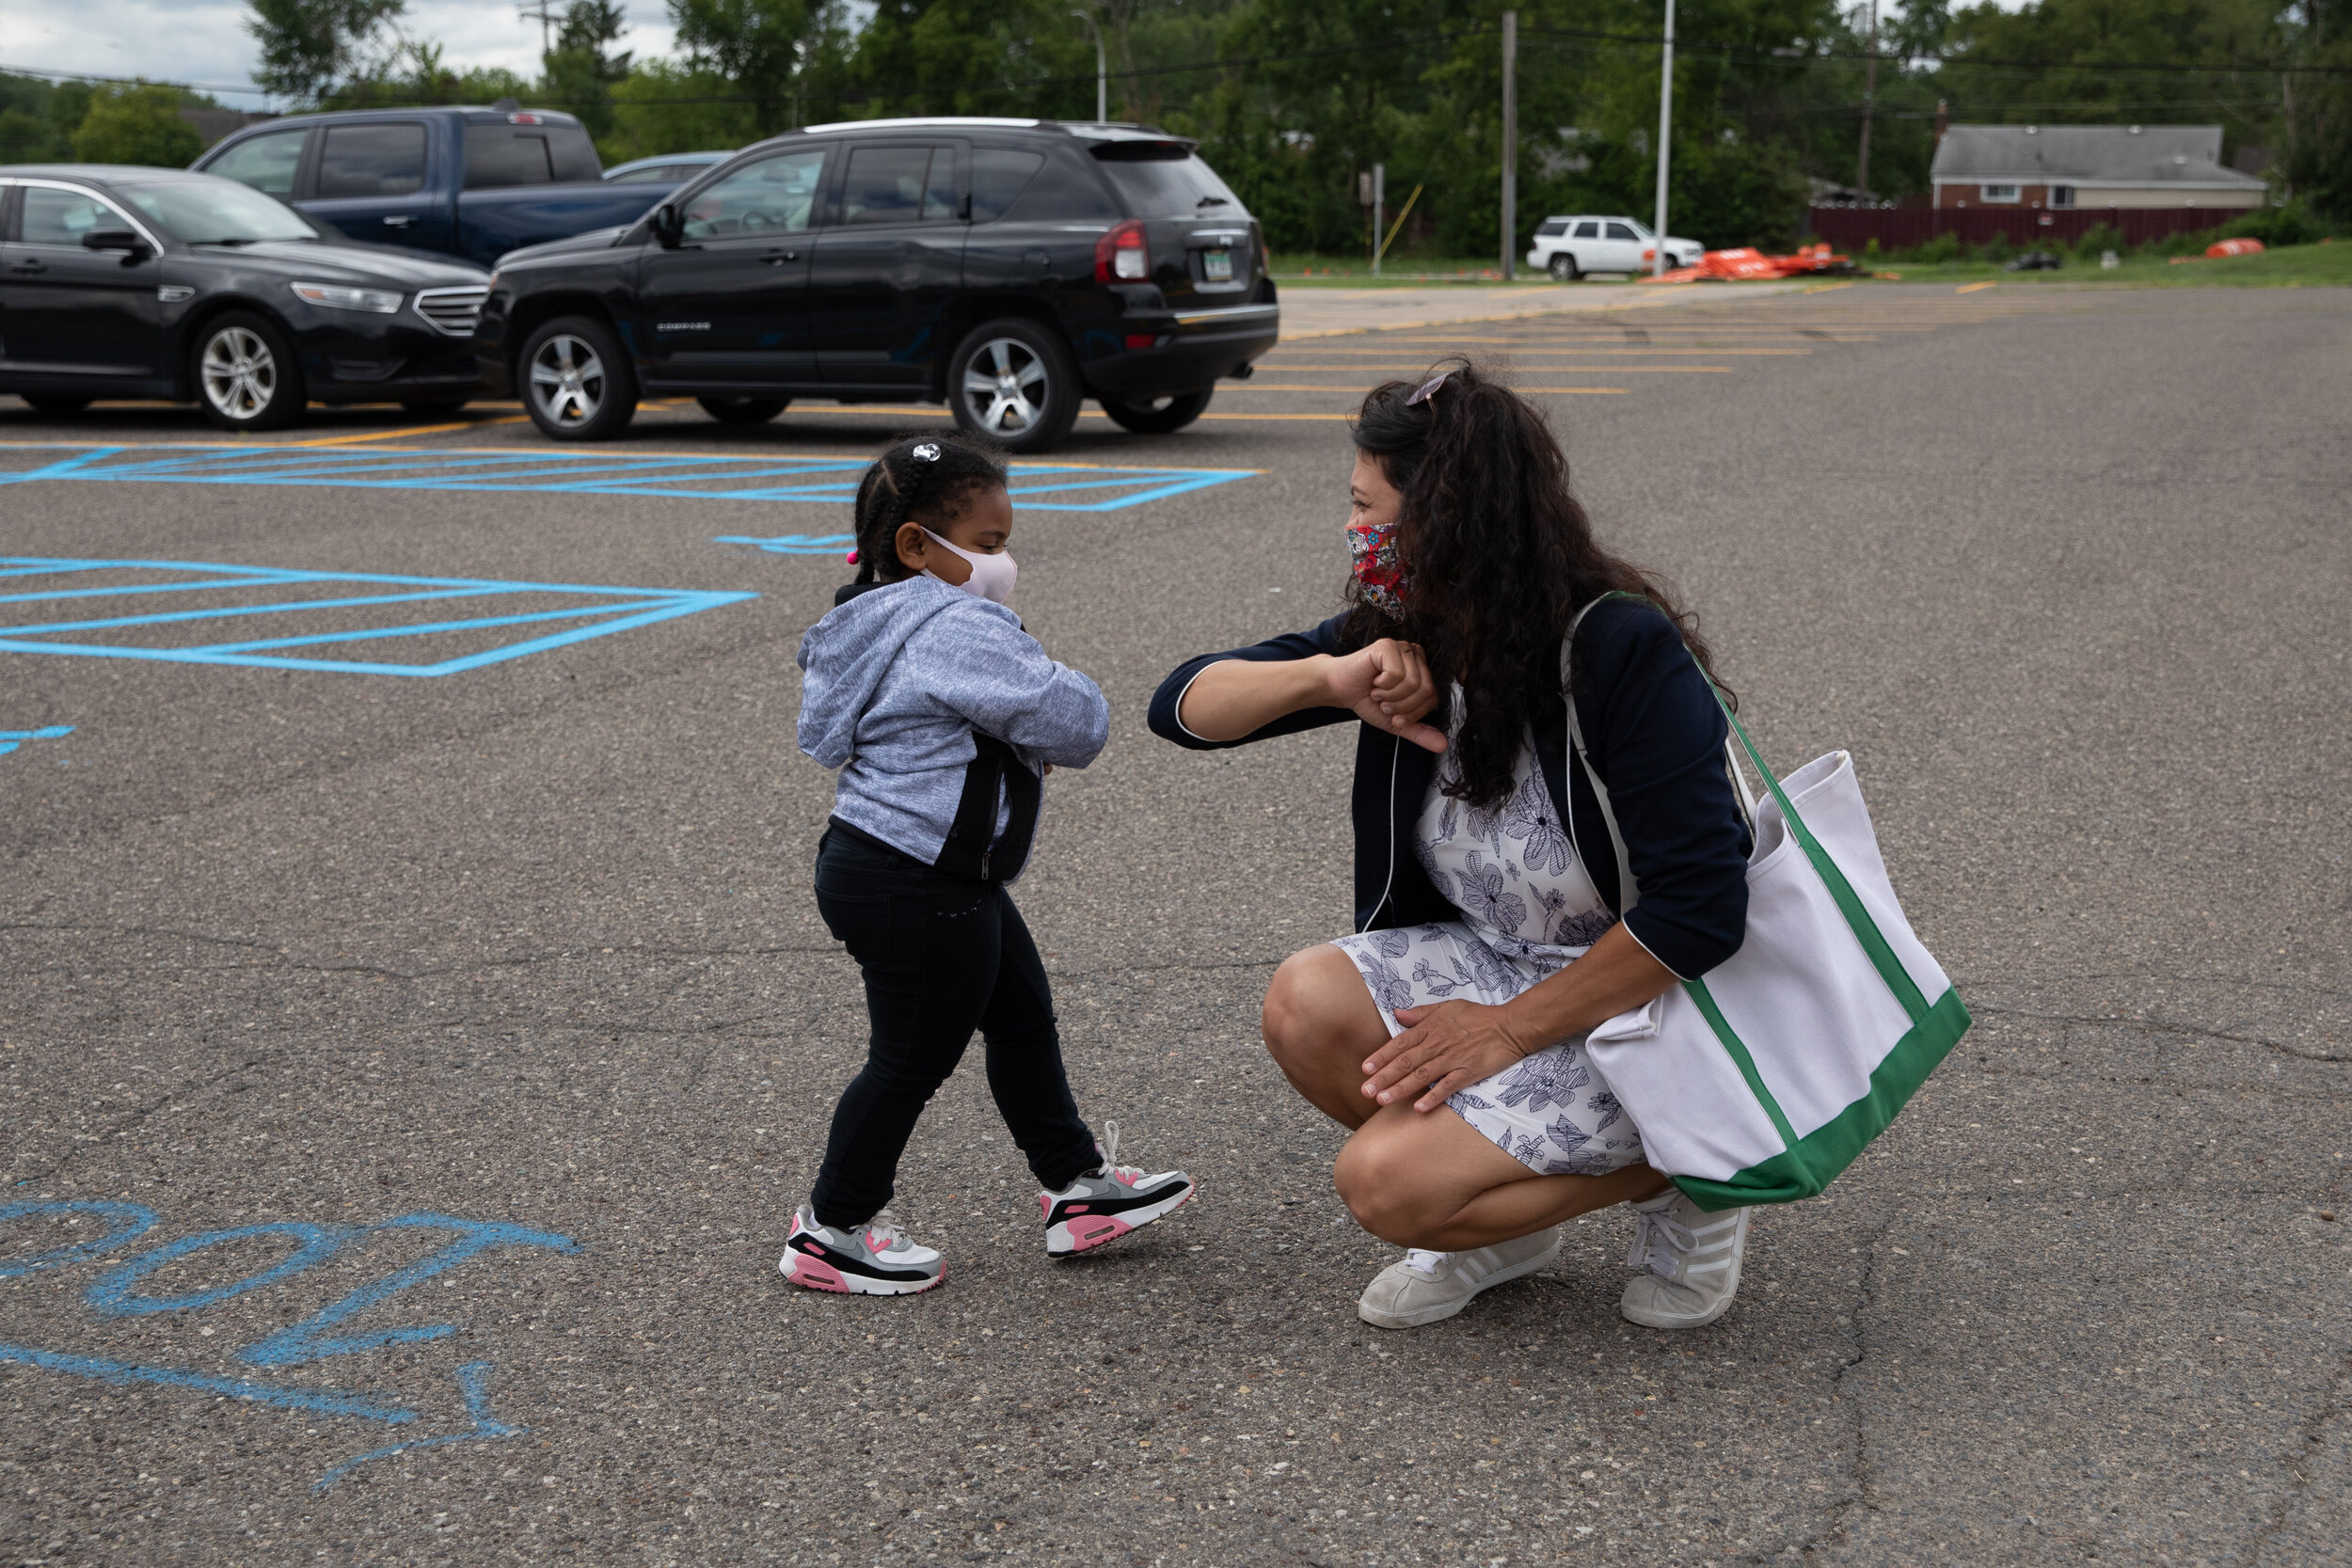  Rep. Rashida Tlaib, D-Detroit elbow bumps a young girl as she visits different voting sites on the day of the primary election on August, 4, 2020 in Inkster, Michigan.  Tlaib defeated primary challenger Detroit City Council President Brenda Jones in